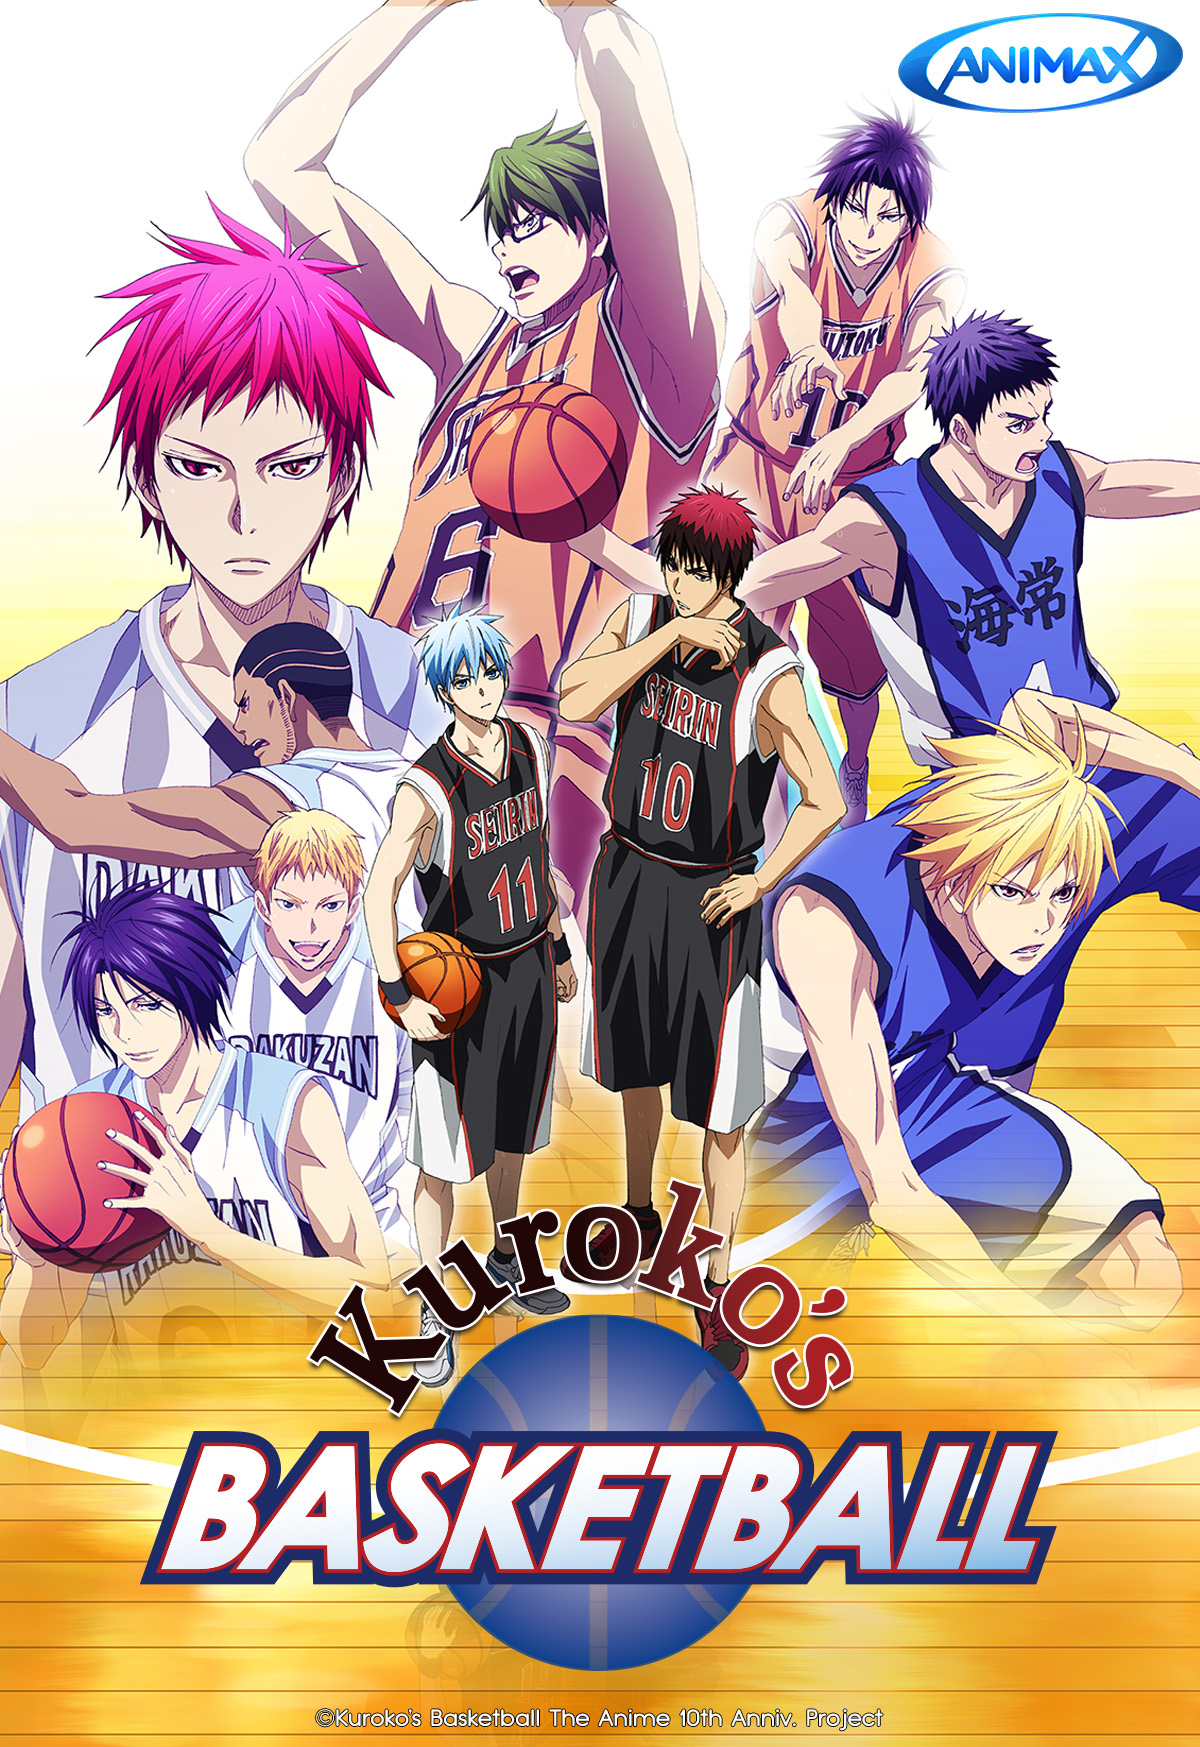 Kuroko's Basketball stage play cast is ready for tip-off in the anime  adaptation's first photo | SoraNews24 -Japan News-